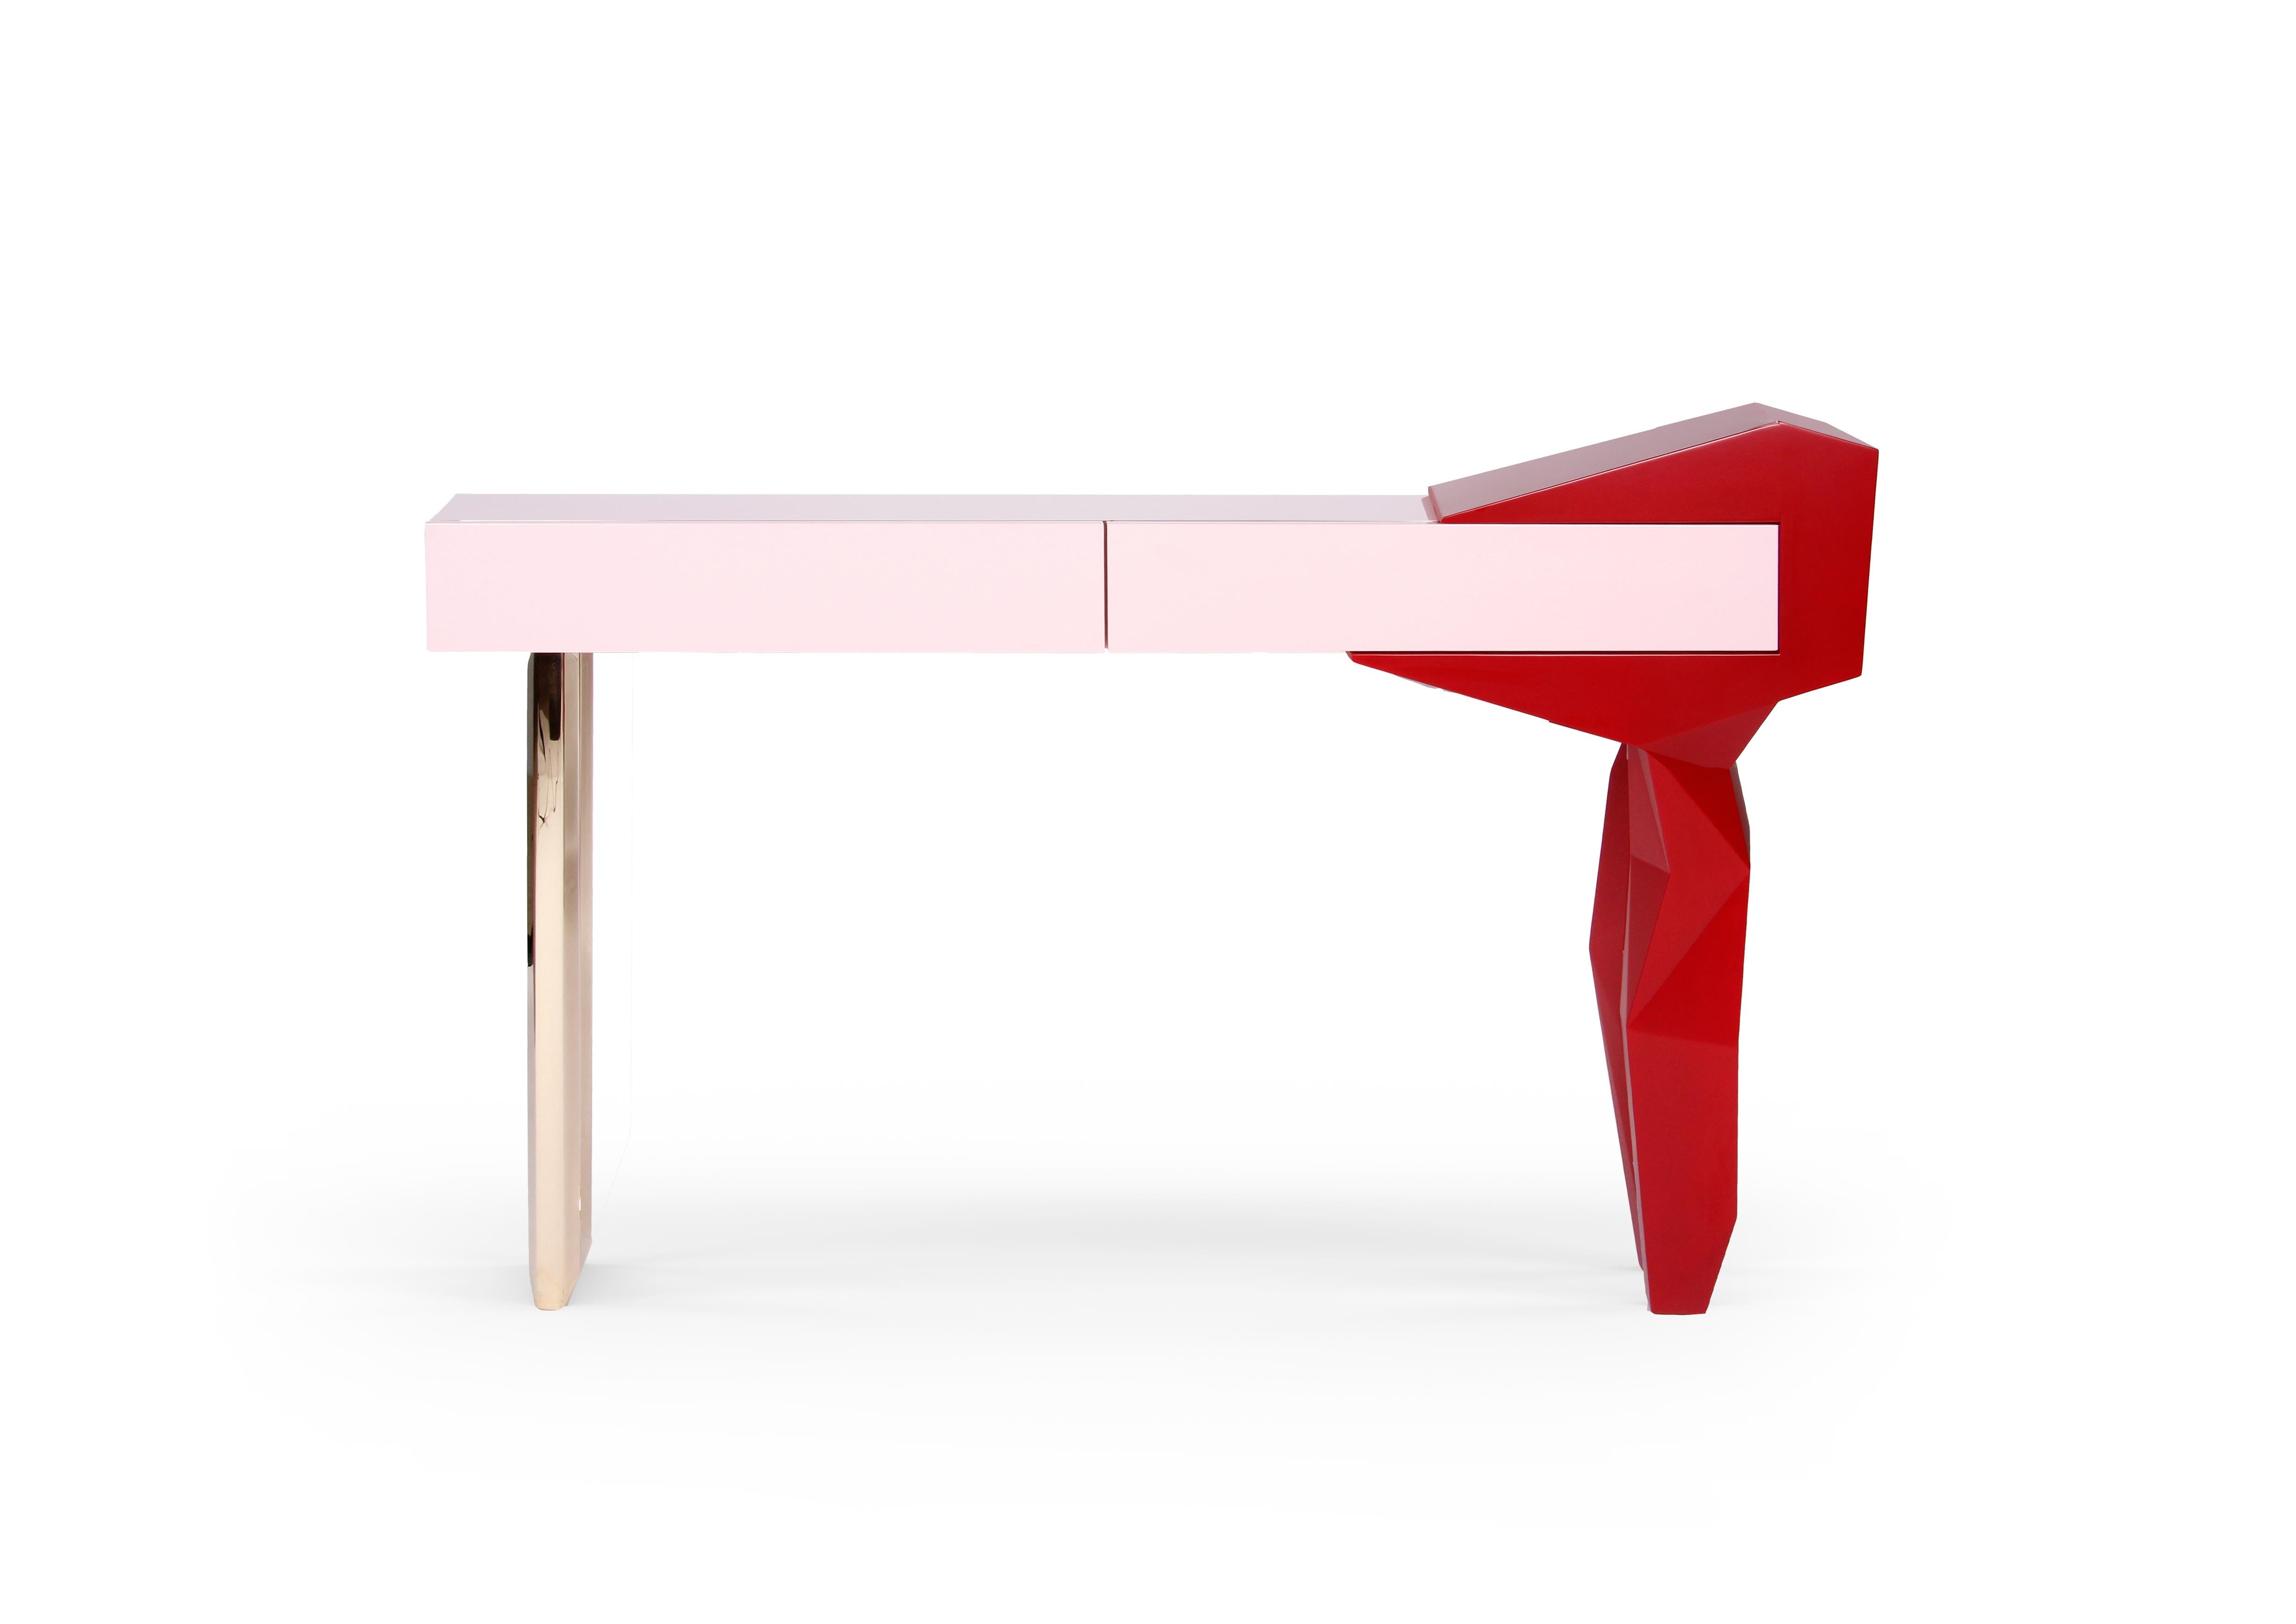 Colorful pink Rockconsole, Royal Stranger
Dimensions: Width 160cm, height 90cm, depth 50cm
Materials: lacquered body suspended by stainless steel coated in brass leg, docked on a matte bordeaux lacquered rock.

The concept of transformation and